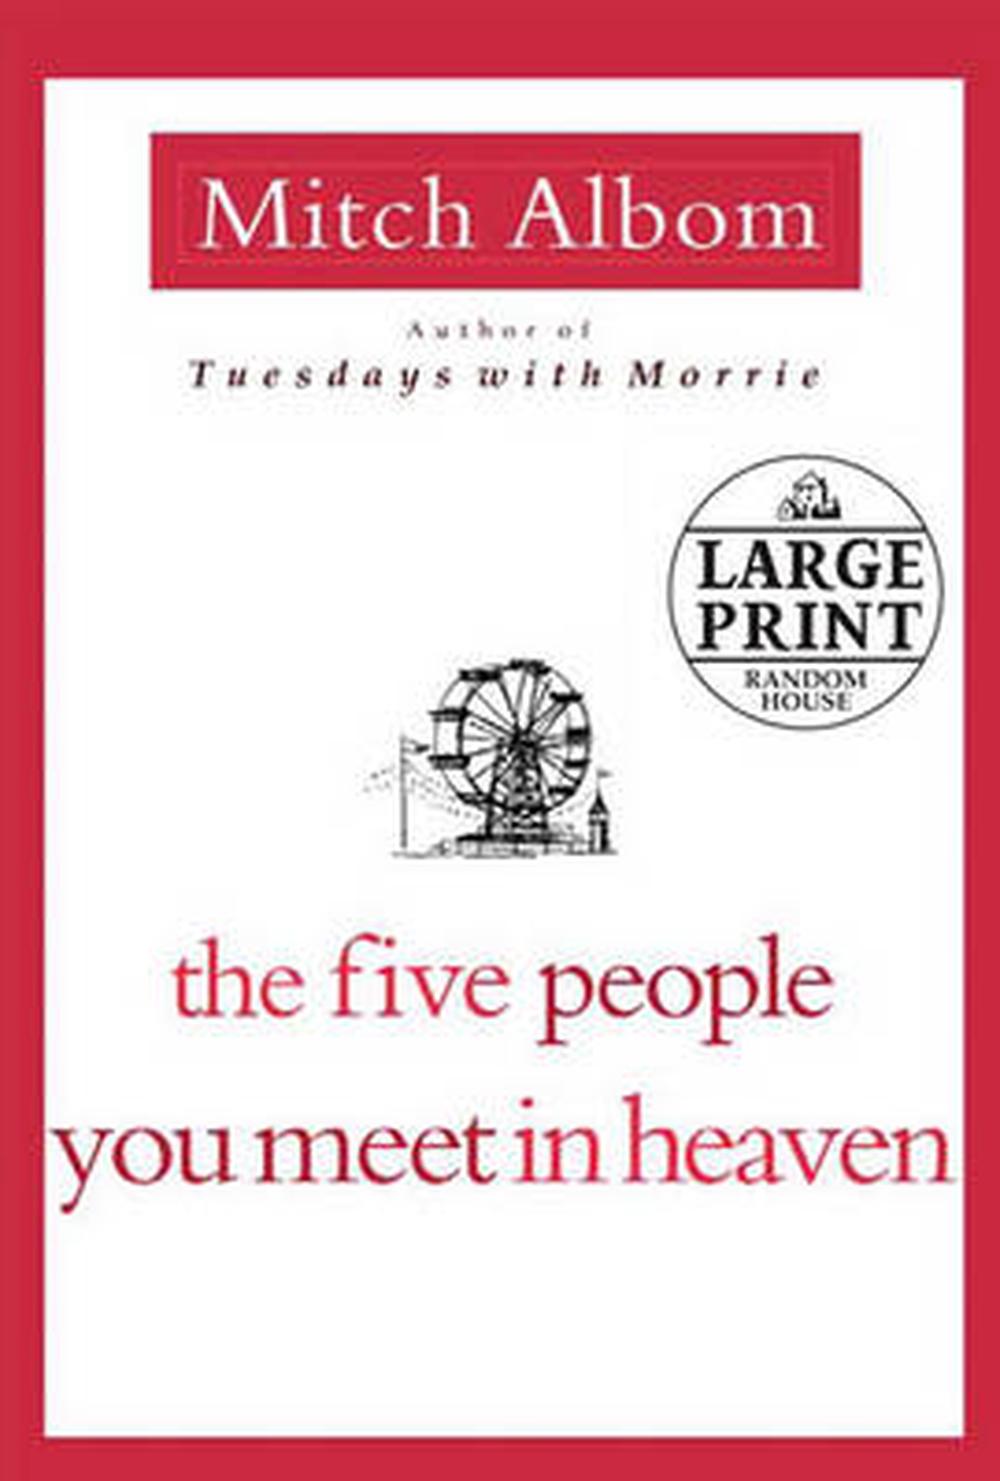 the first five people you meet in heaven